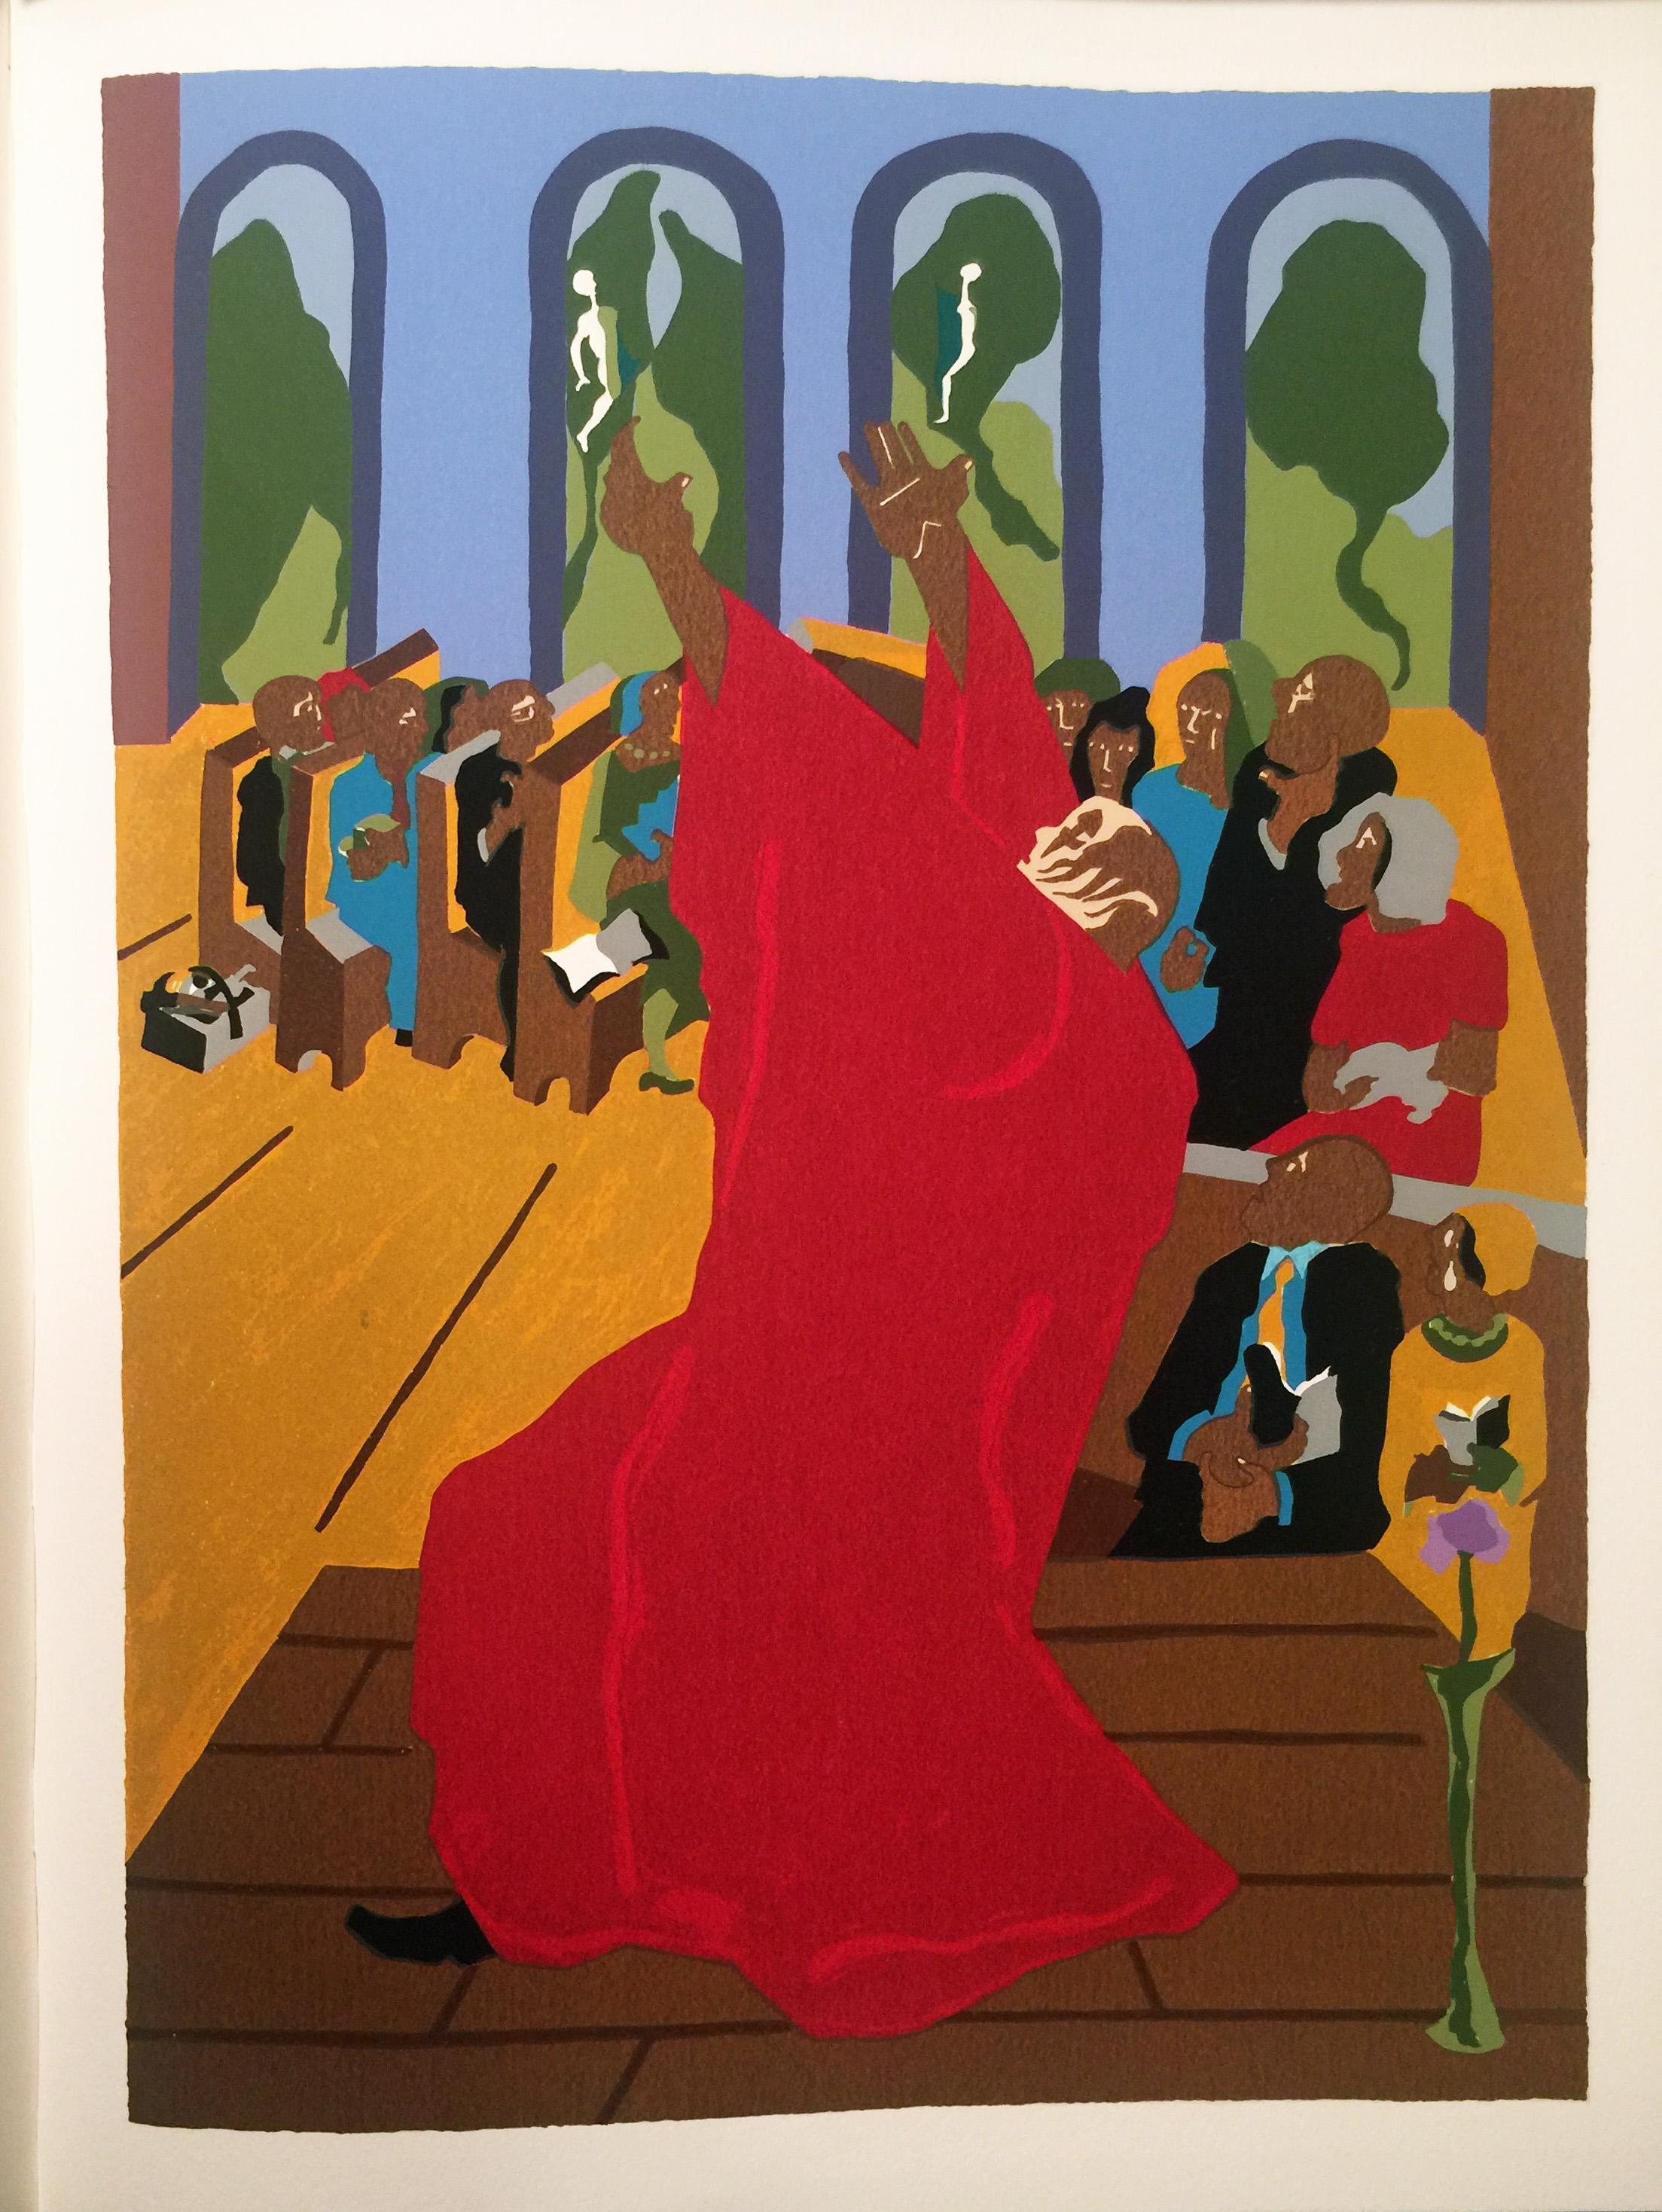 Lawrence, Jacob. THE FIRST BOOK OF MOSES, CALLED GENESIS. THE KING JAMES VERSION. Limited Editions Club, NY 1989. Copy Number 88 of the edition of 400 copies, signed in pencil by Jacob Lawrence on the Justification Page. Very large Folio (23 1/2 x